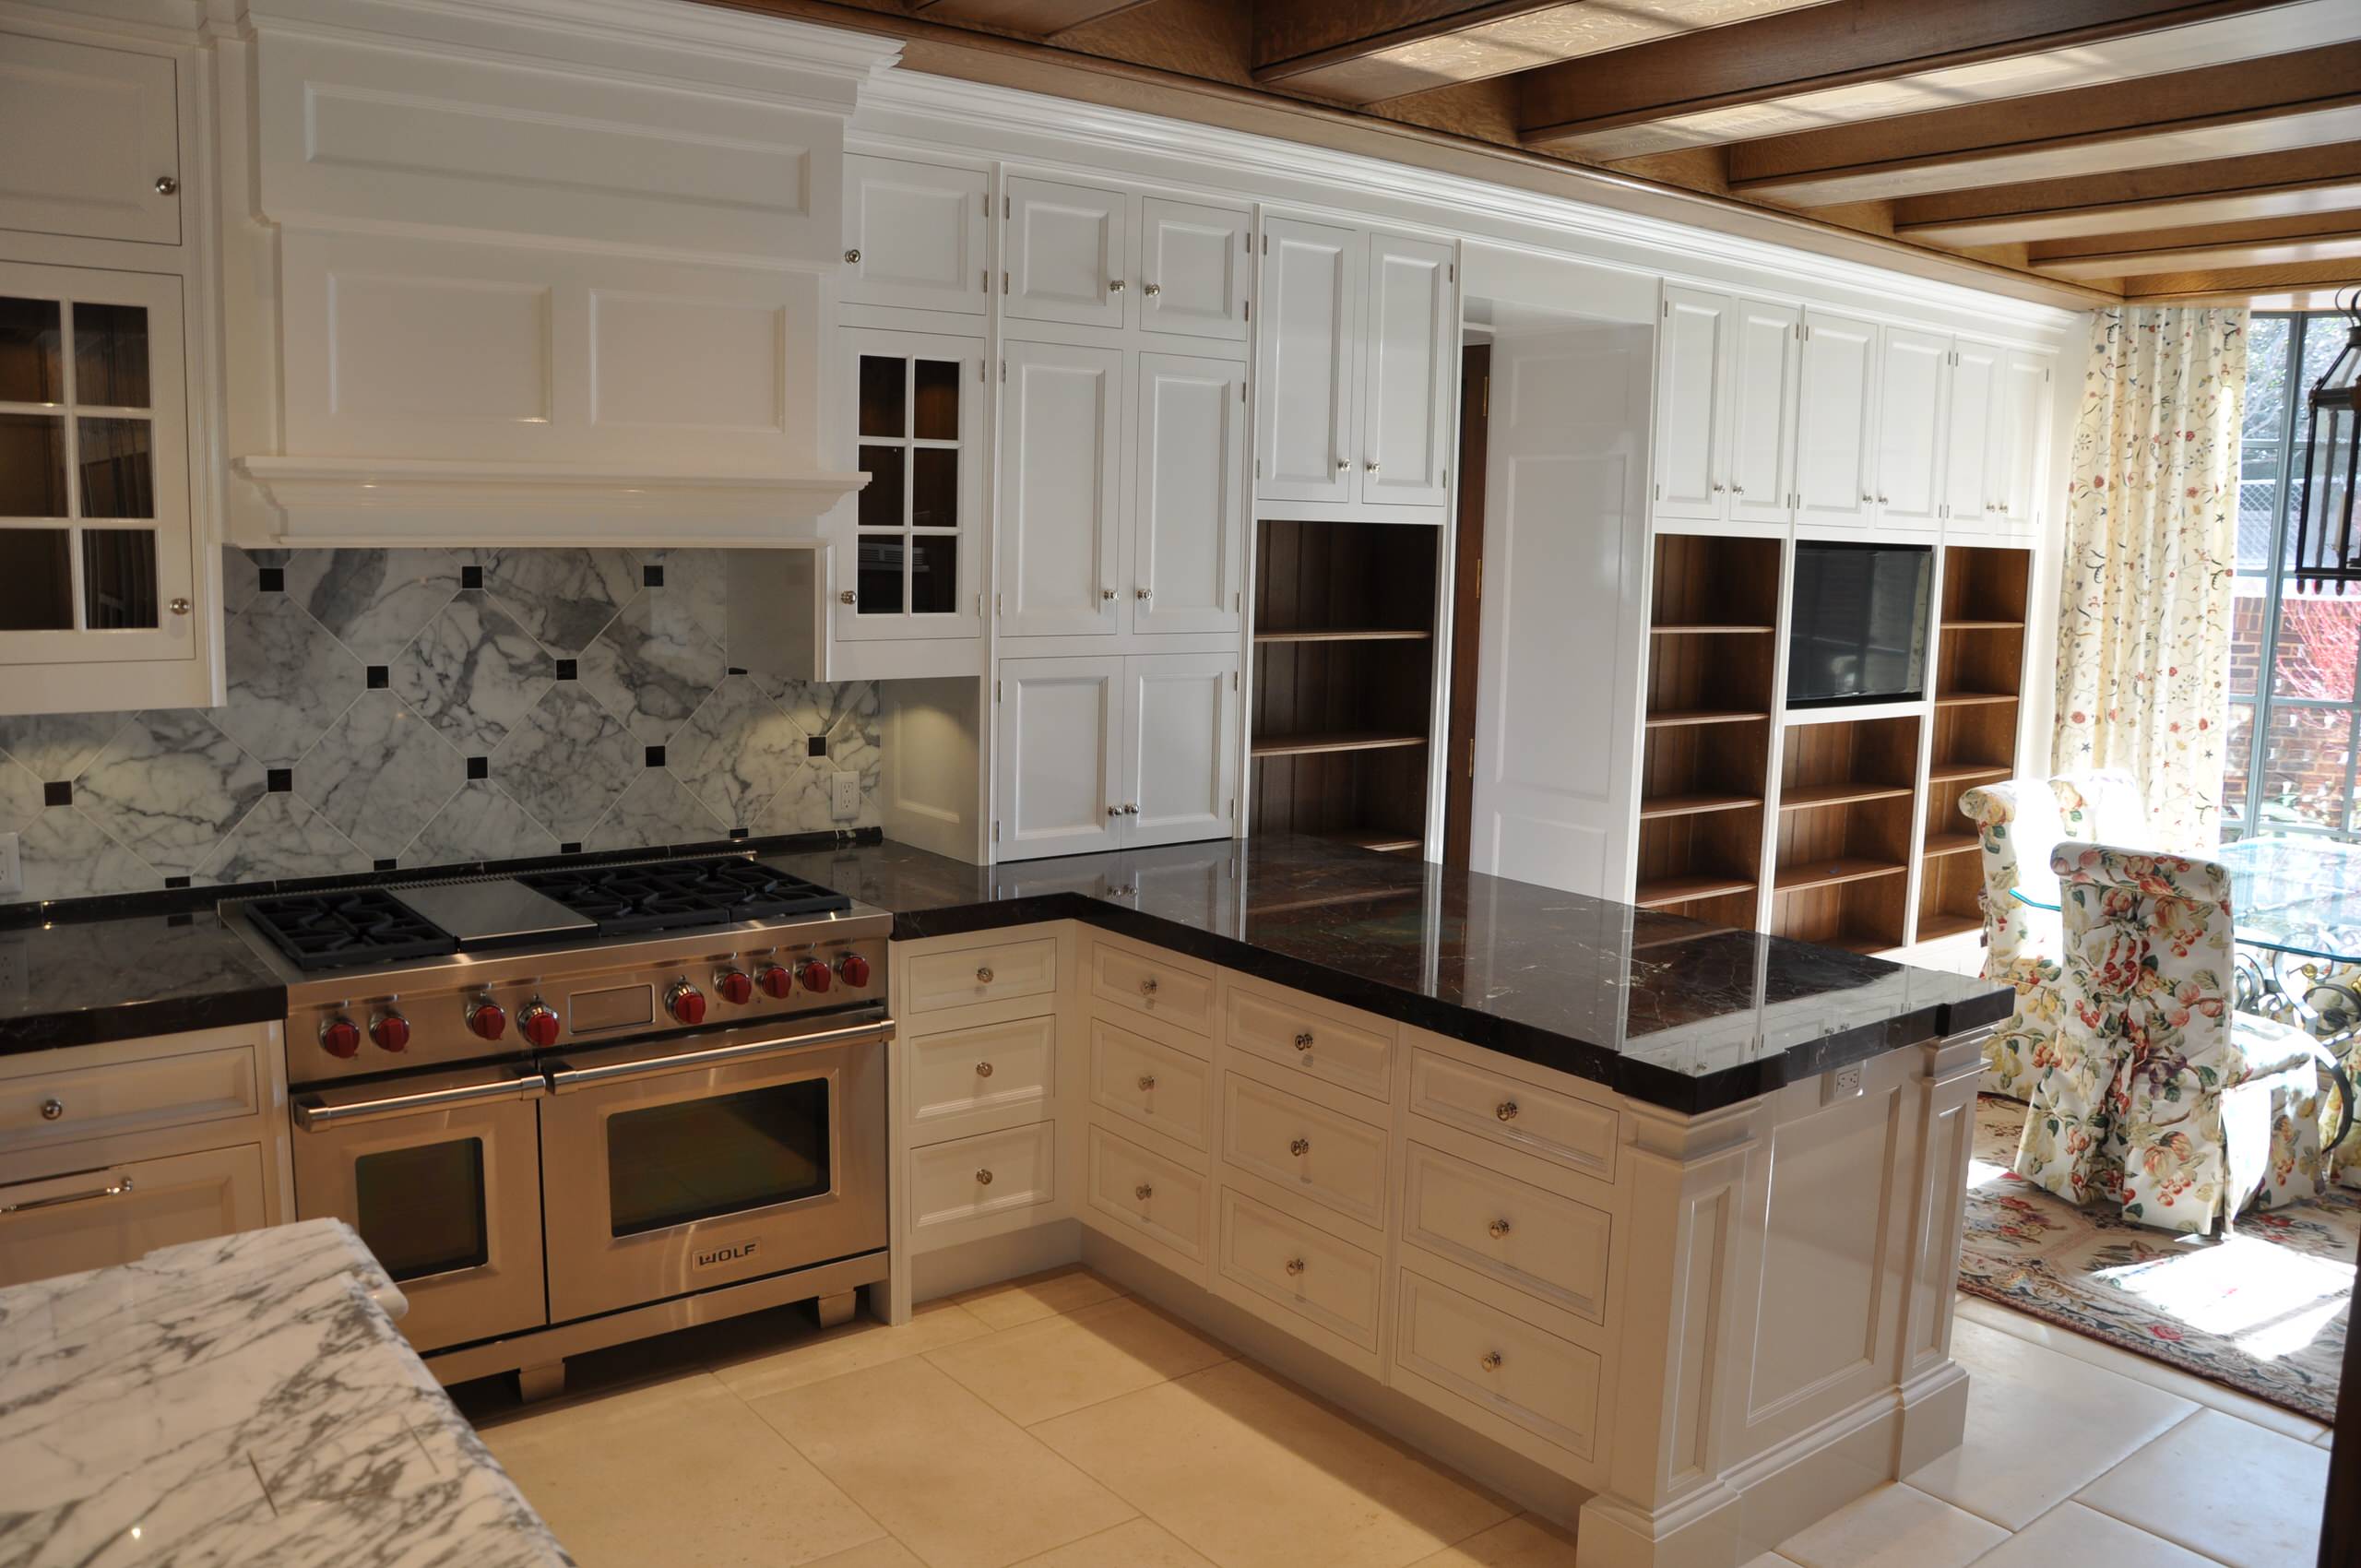 Refectory Kitchen with custom made hardware, hand painted with high gloss paint.